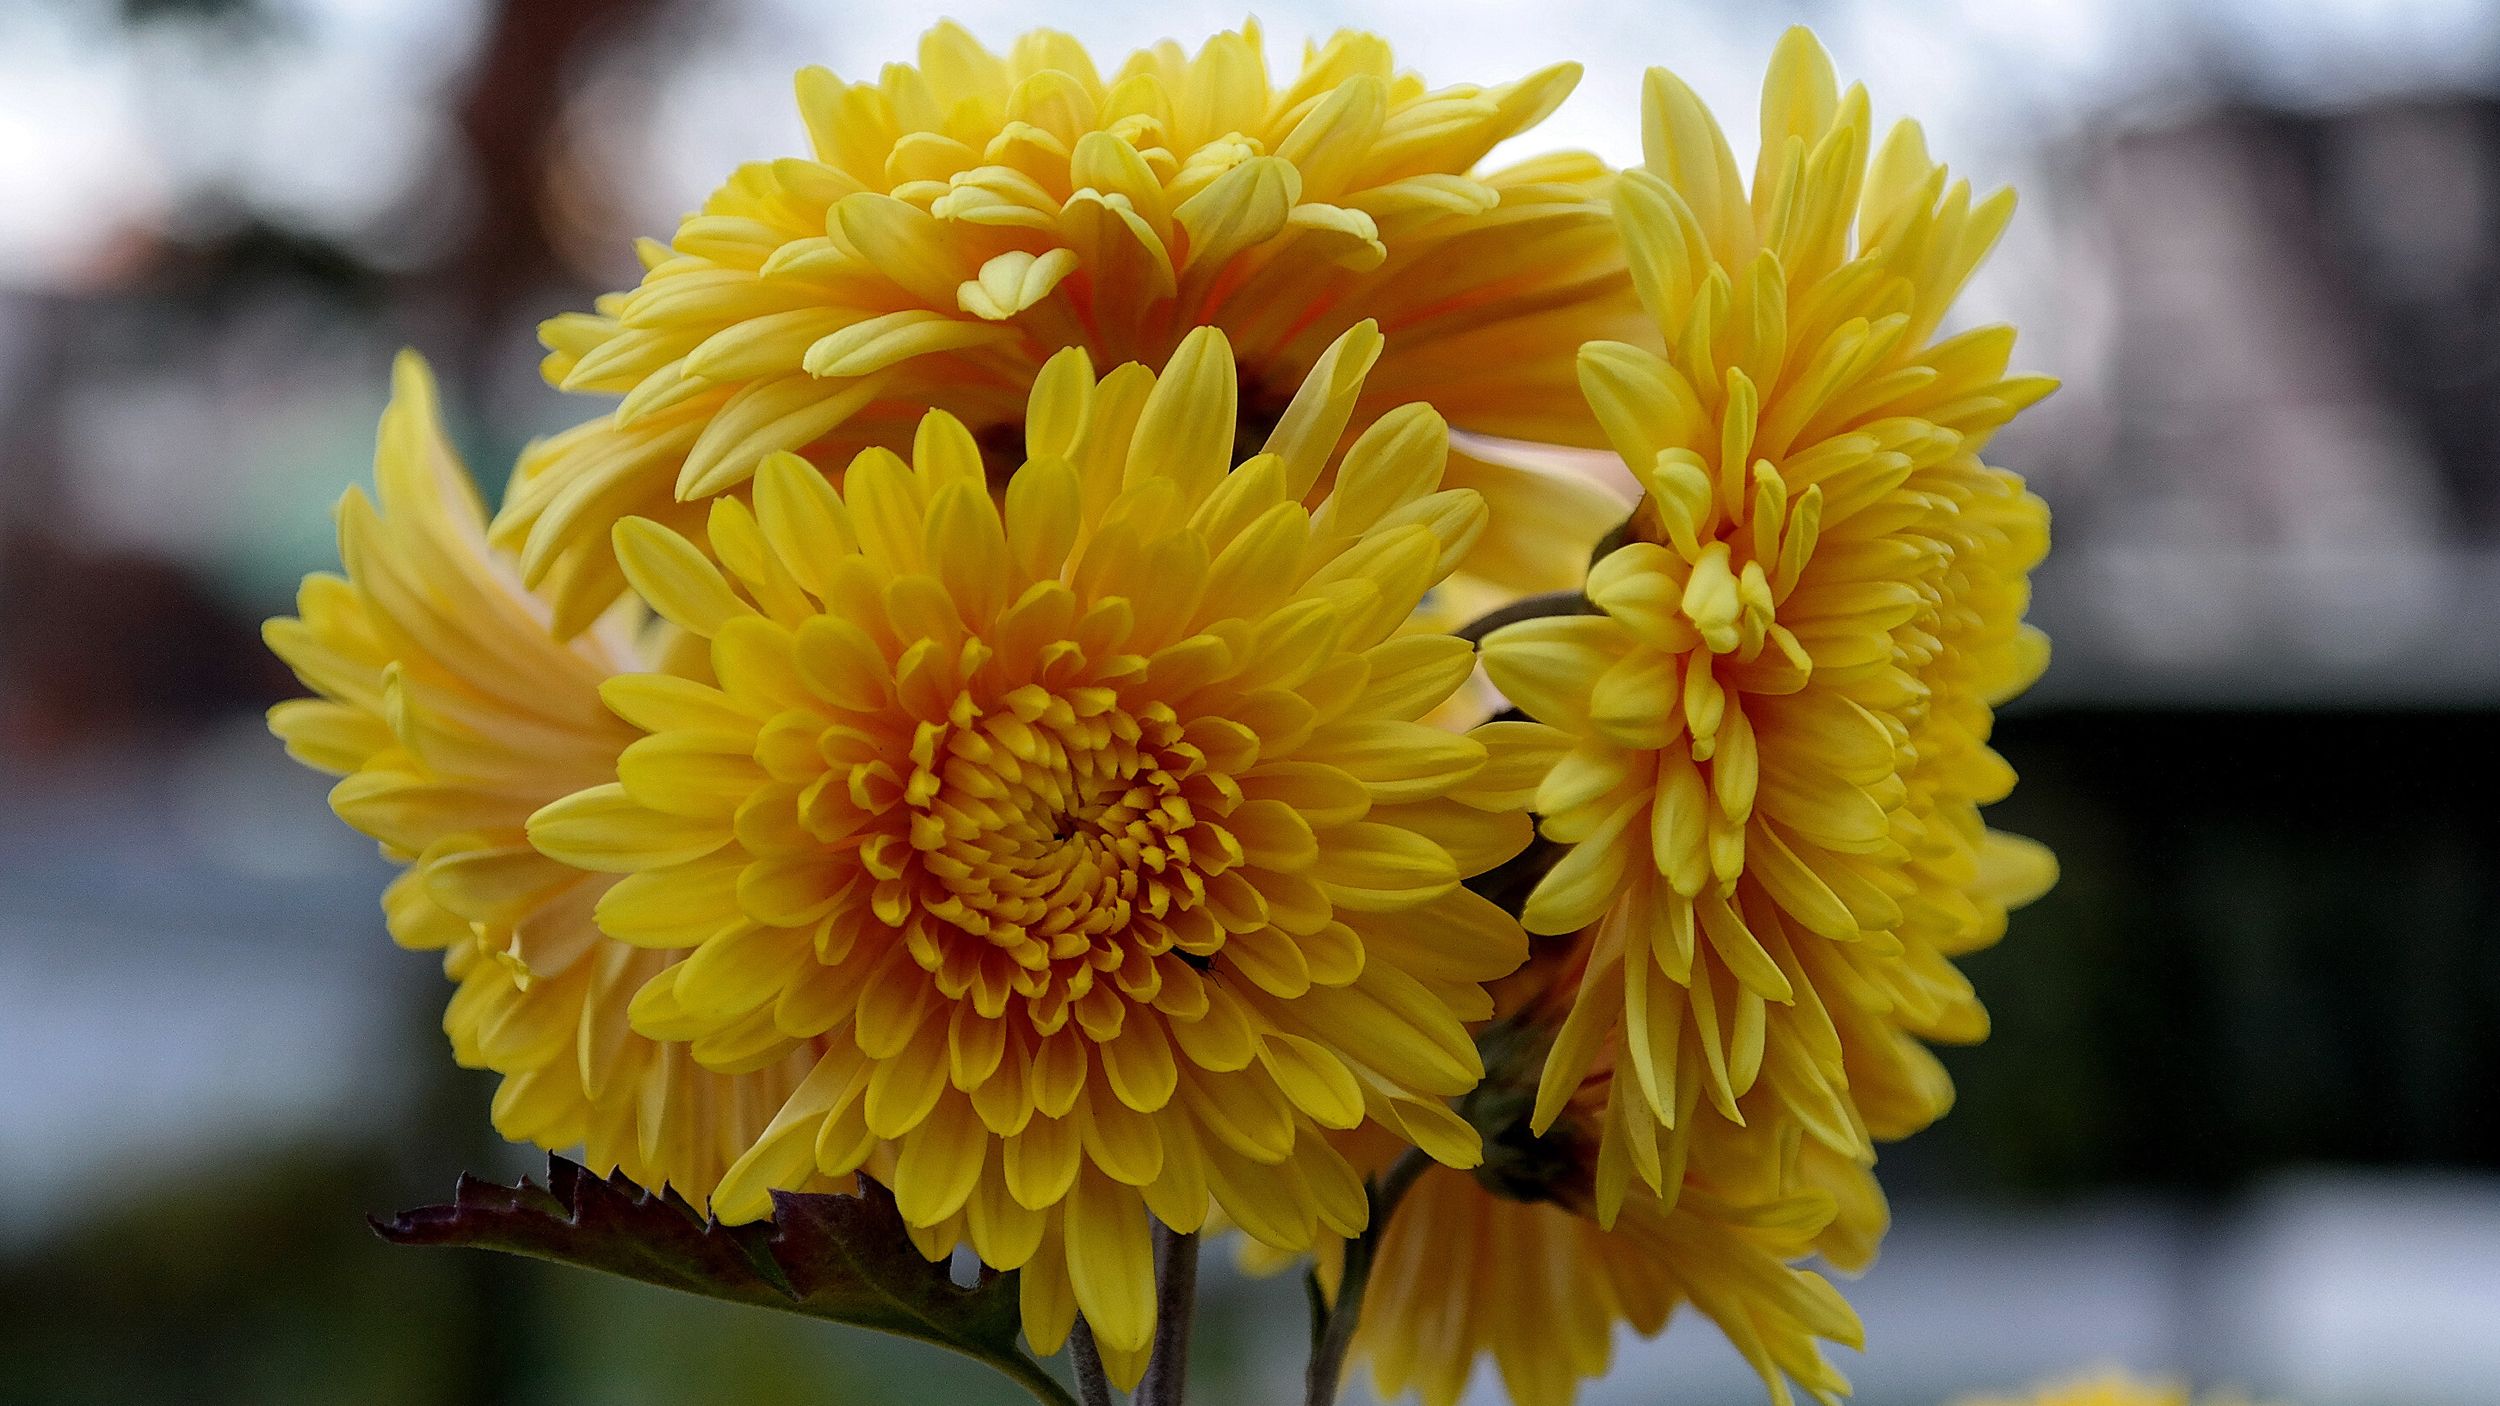 How to Grow, & Care for Fall Chrysanthemums the